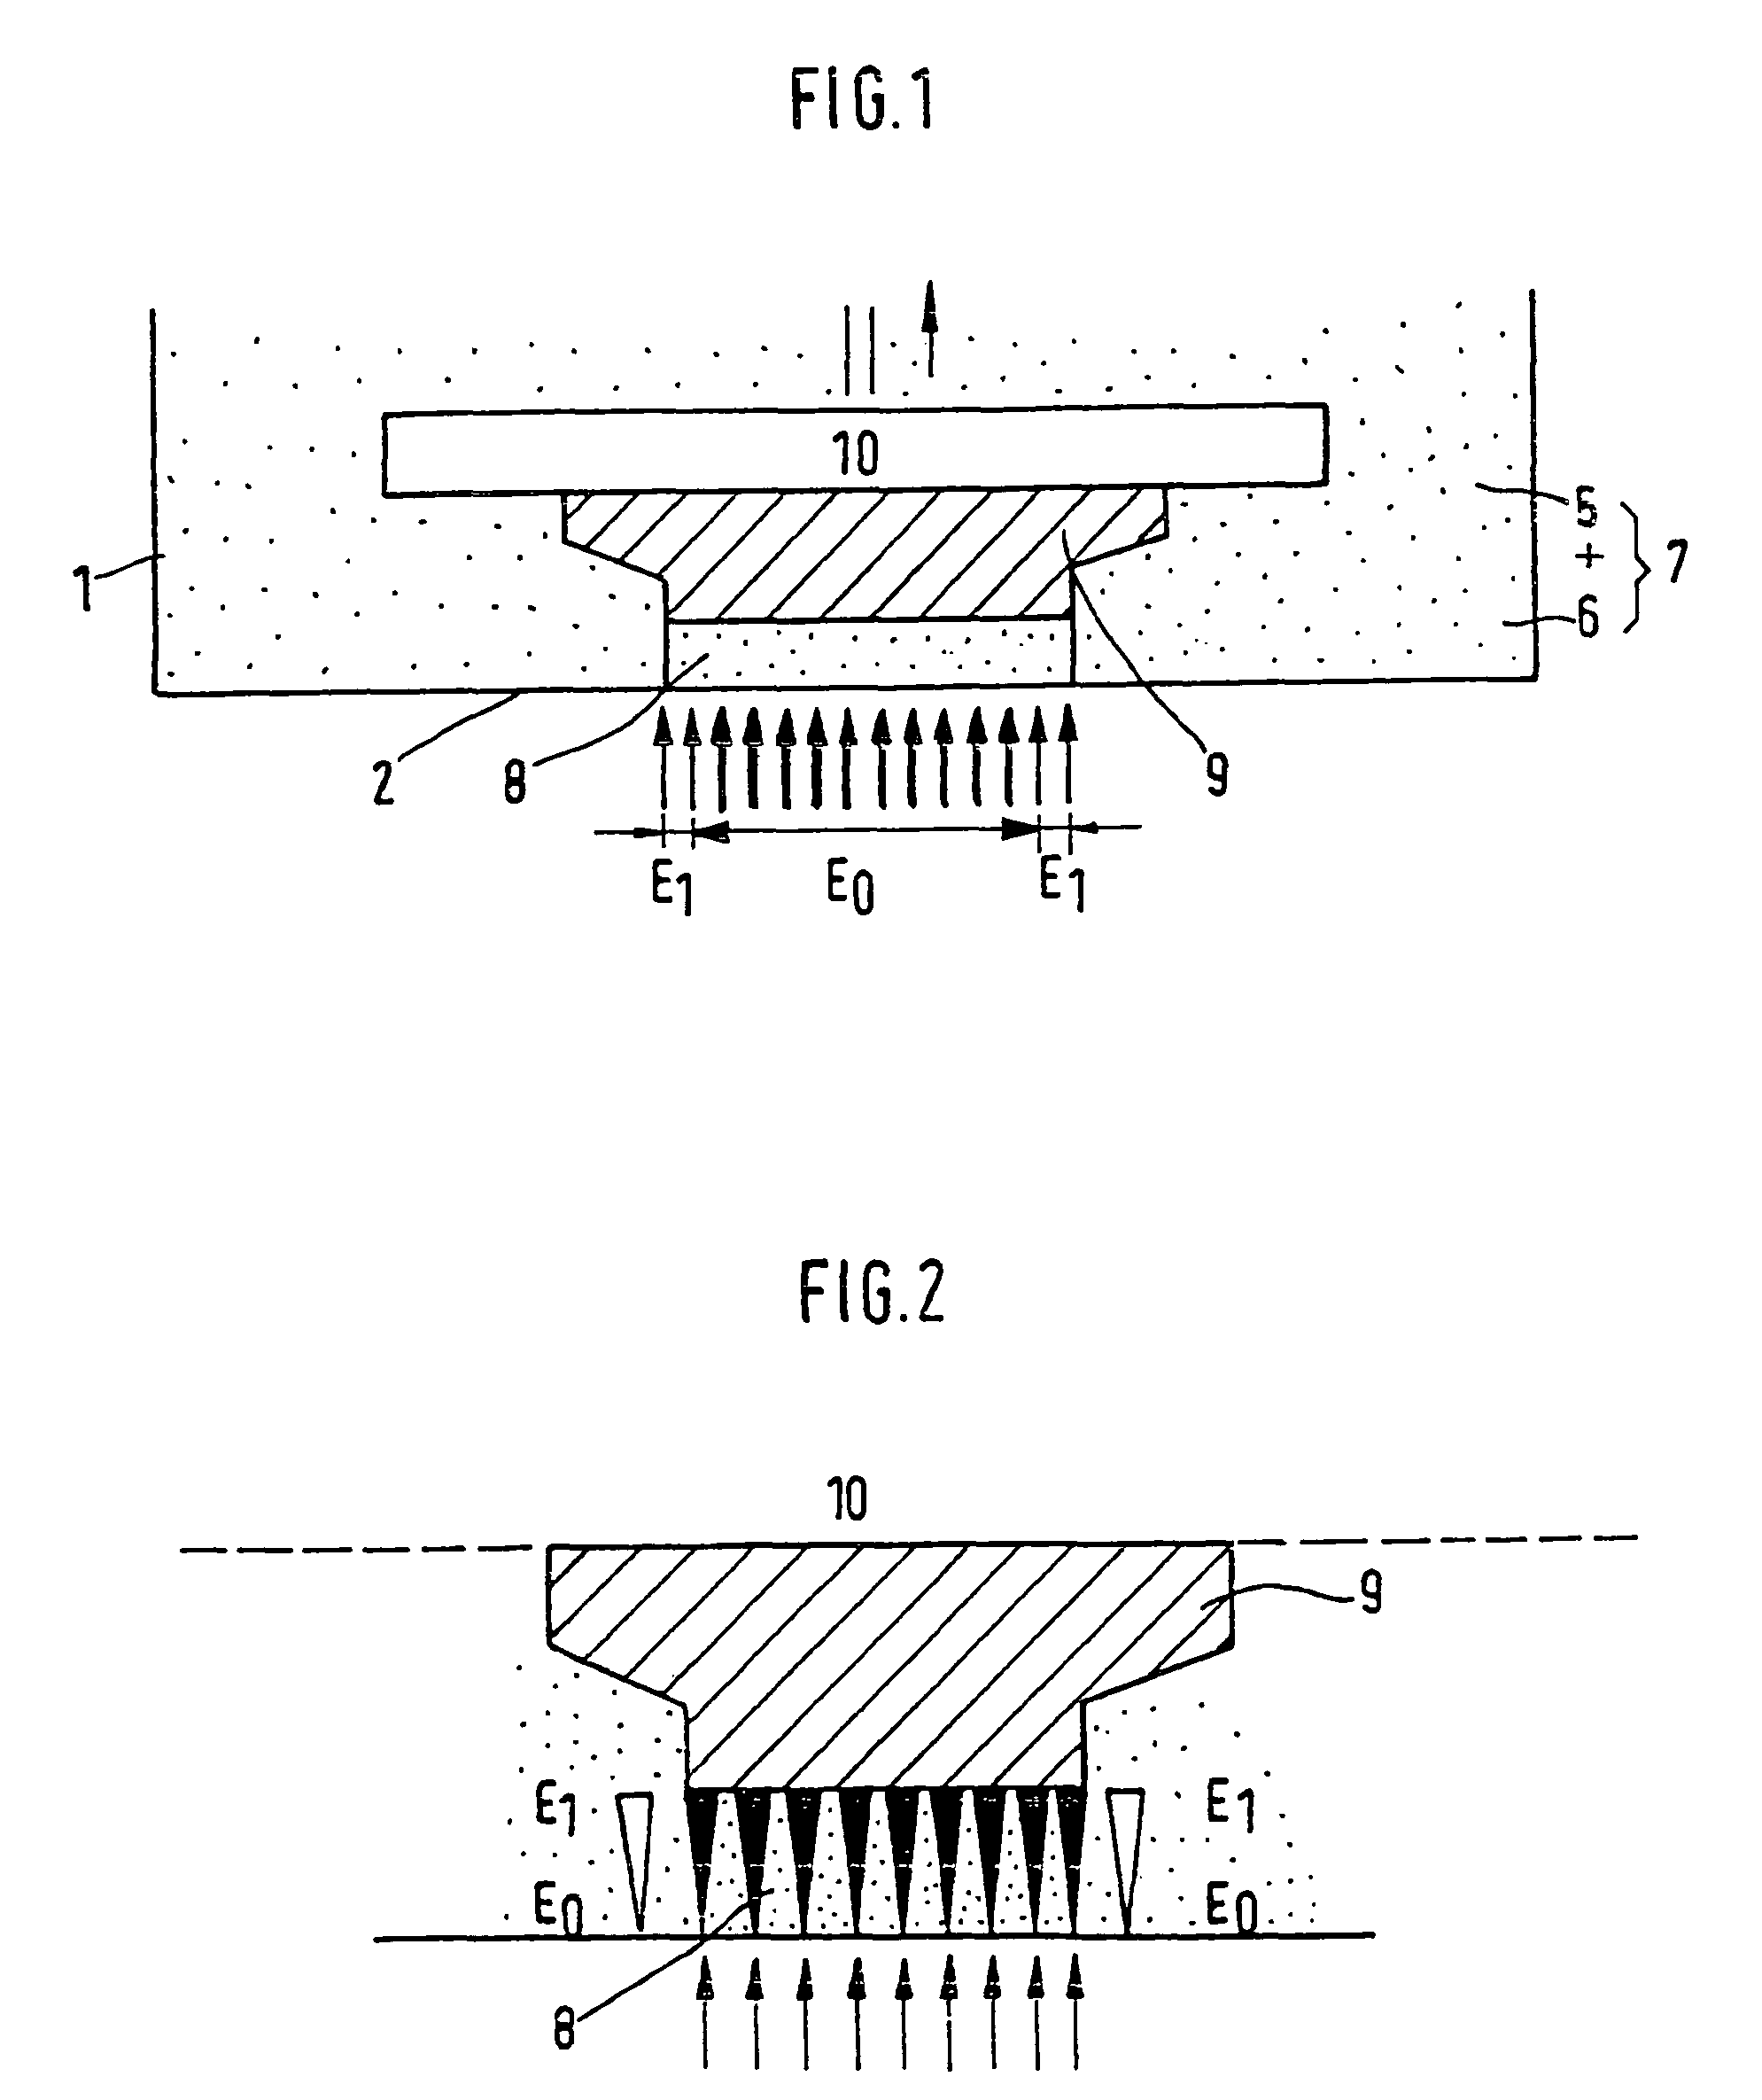 Process and freeform fabrication system for producing a three-dimensional object